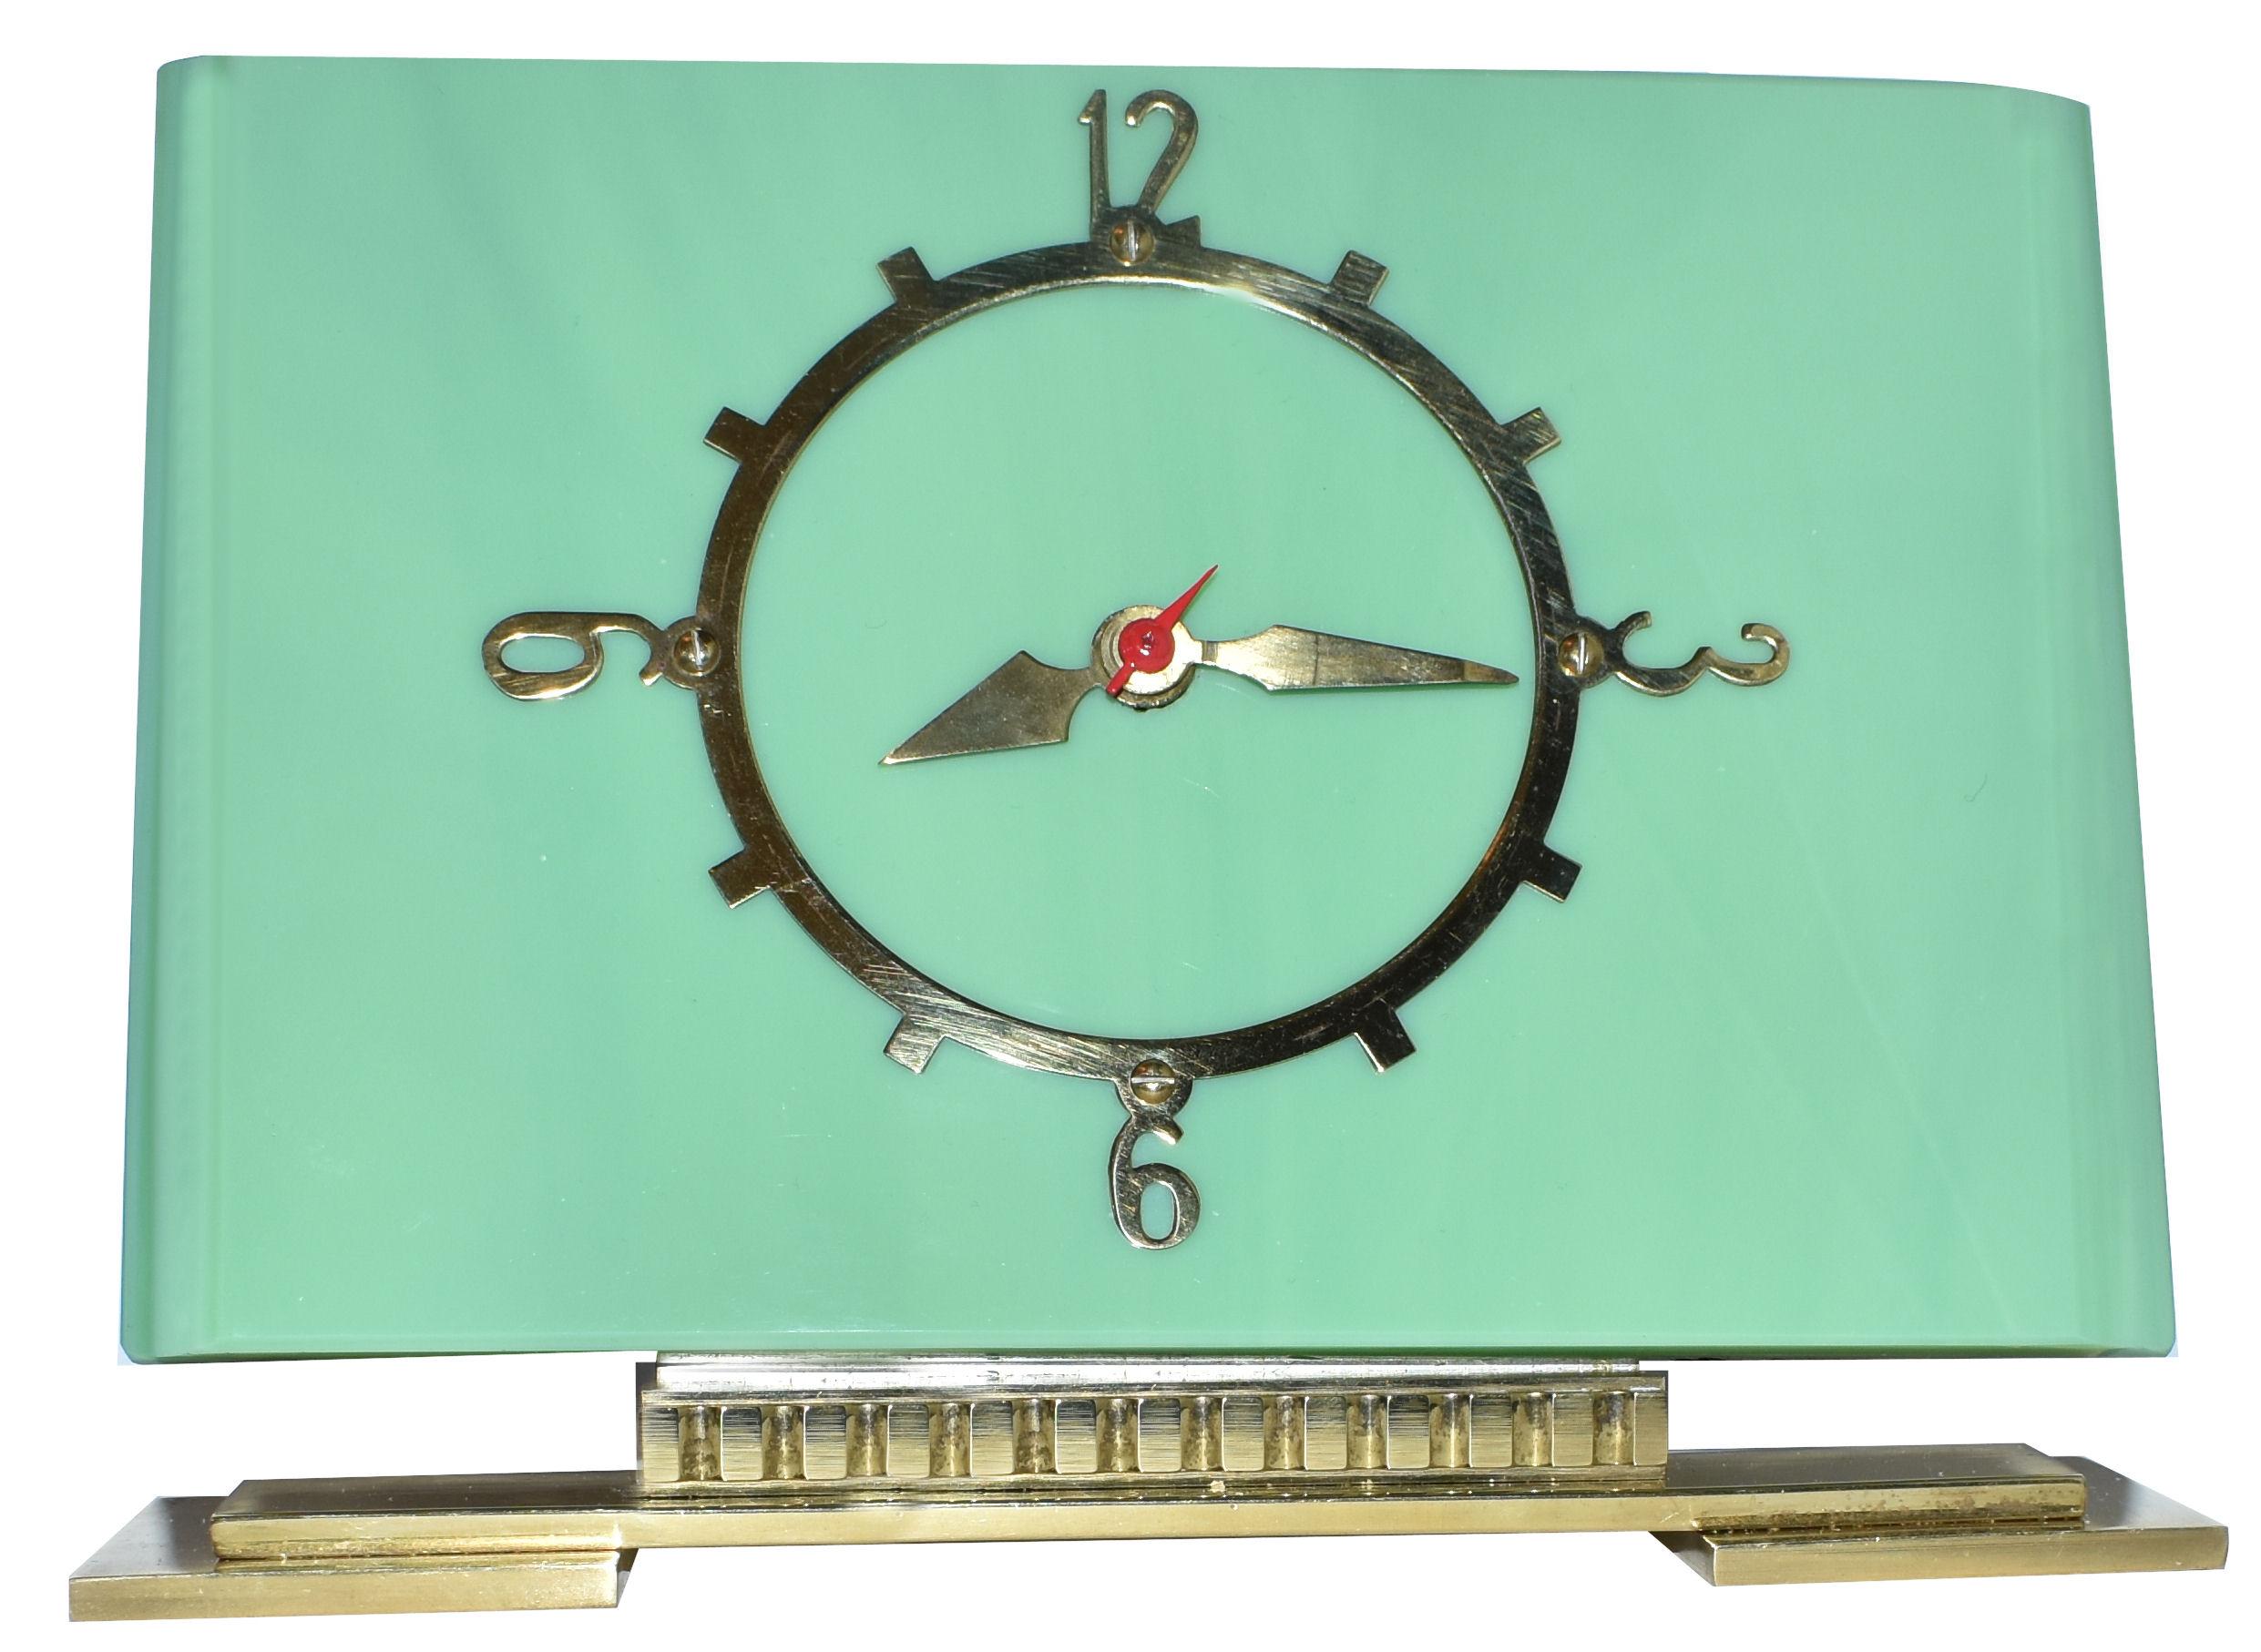 Fabulous 1930s Art Deco modernist mantle clock by British electric meters ltd. Thick vitrolite 'deco green' glass clock with highly polished brass plinth and dial. Runs on electric, works perfectly and has a silent motor so no tics. Lovely condition